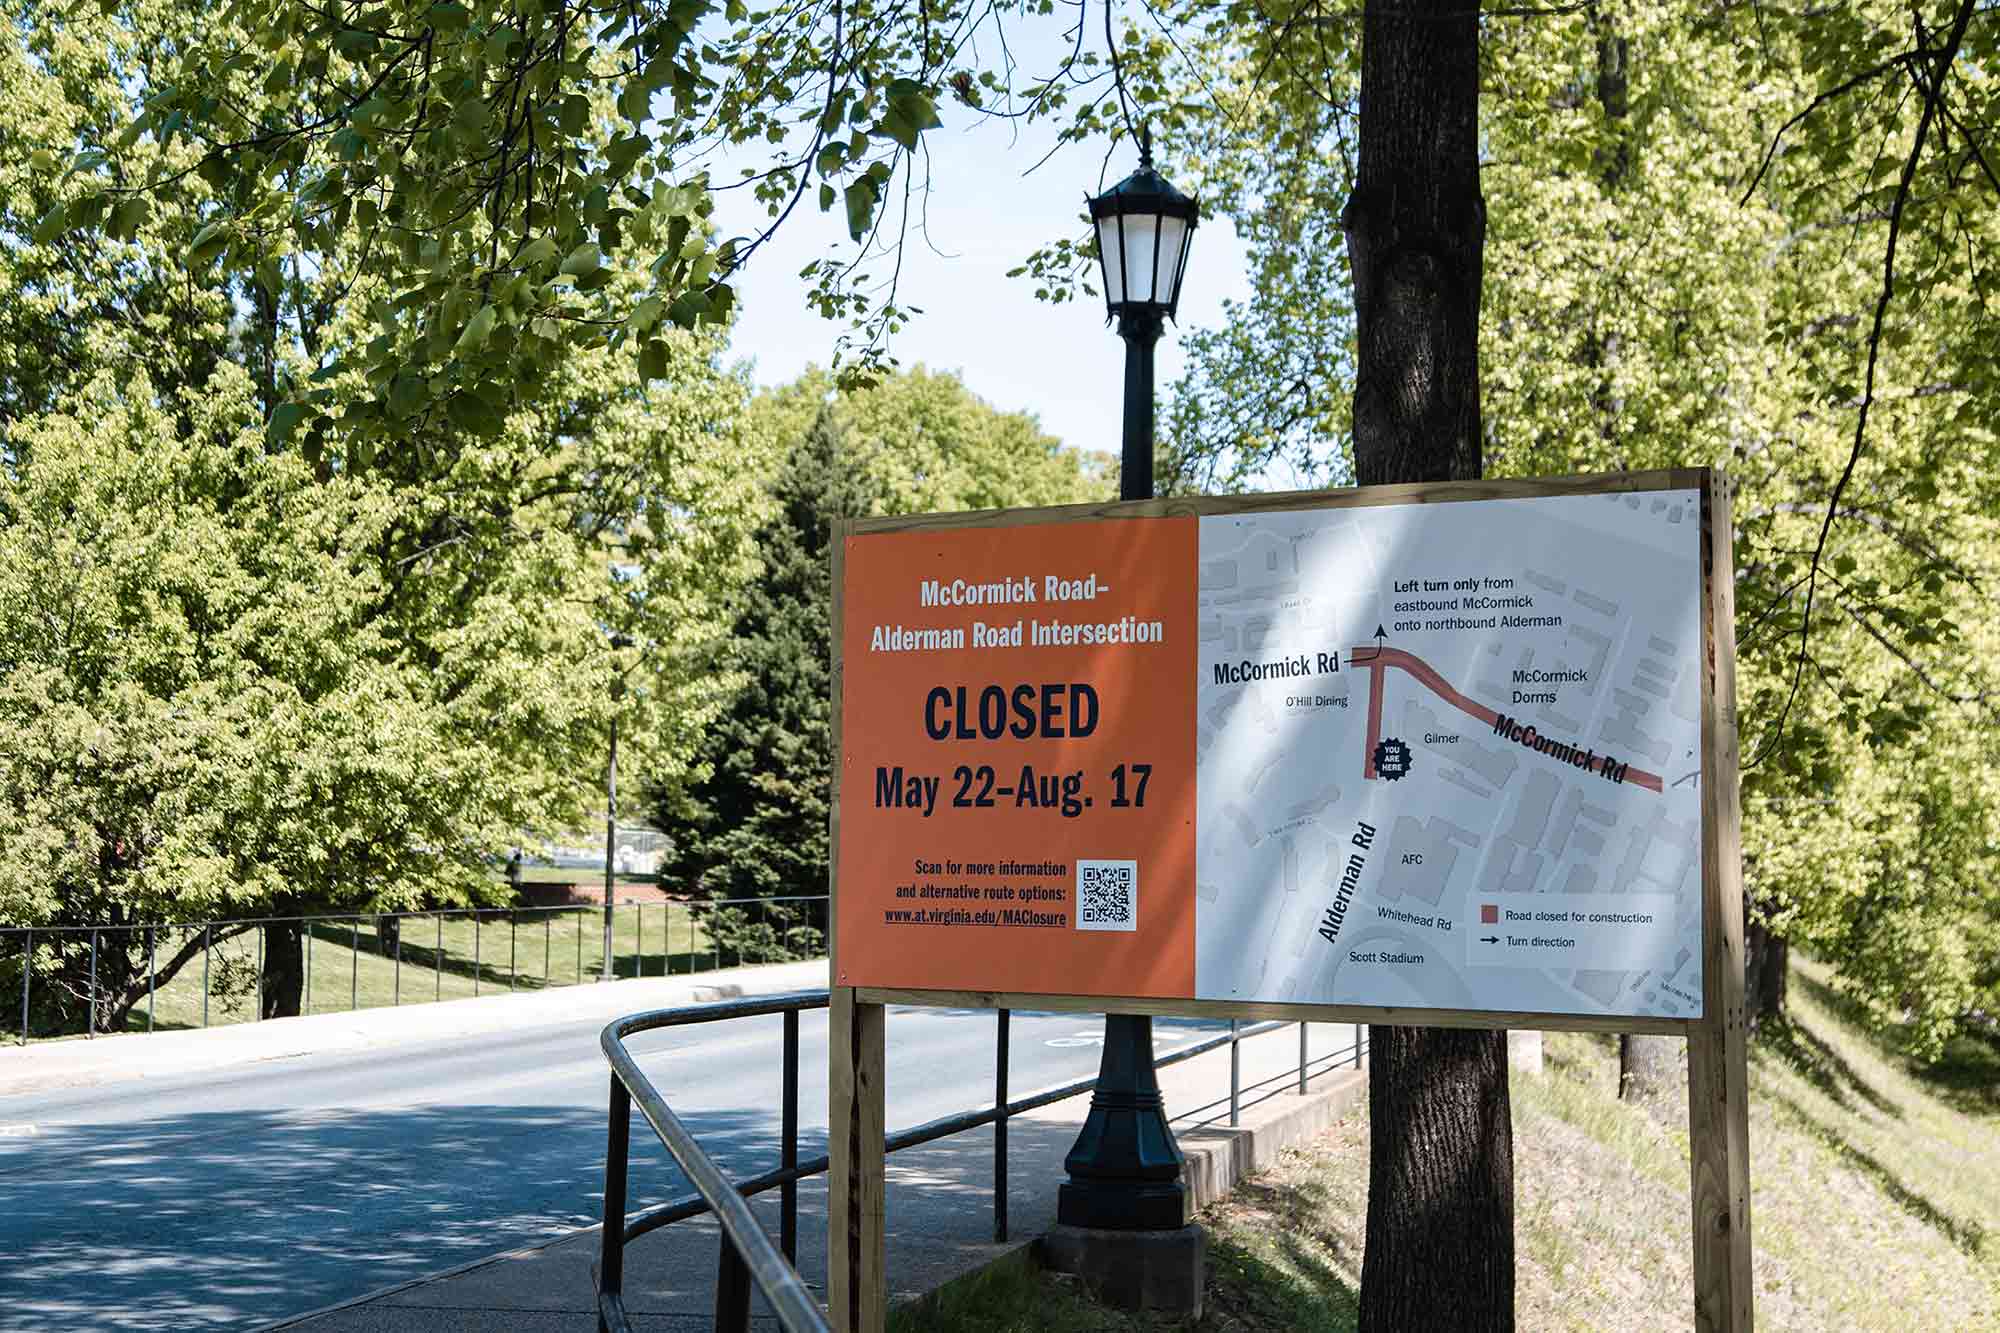 Posted sign informing drivers of the construction and road closures